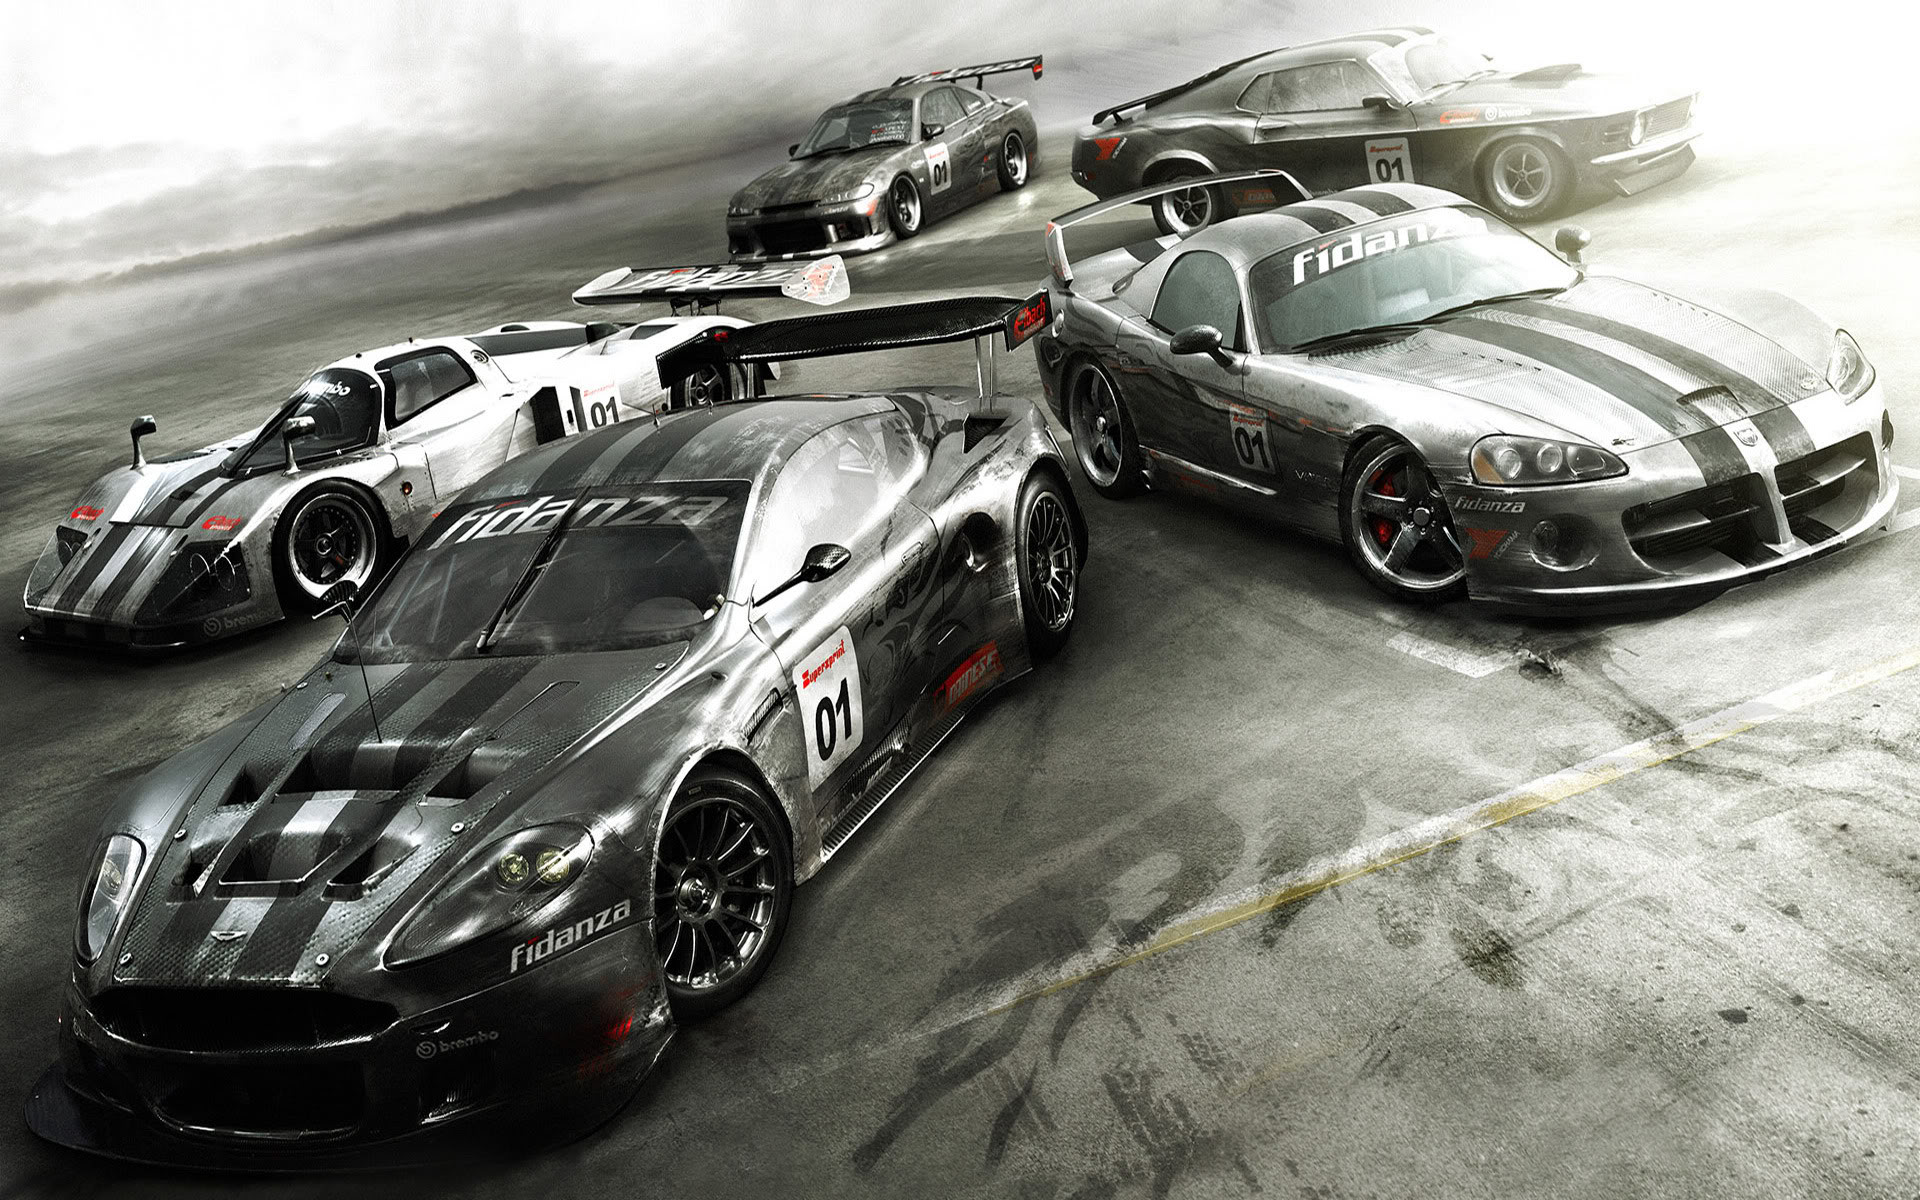 Download full size Ready To Race Race Driver Grid wallpaper / 1920x1200